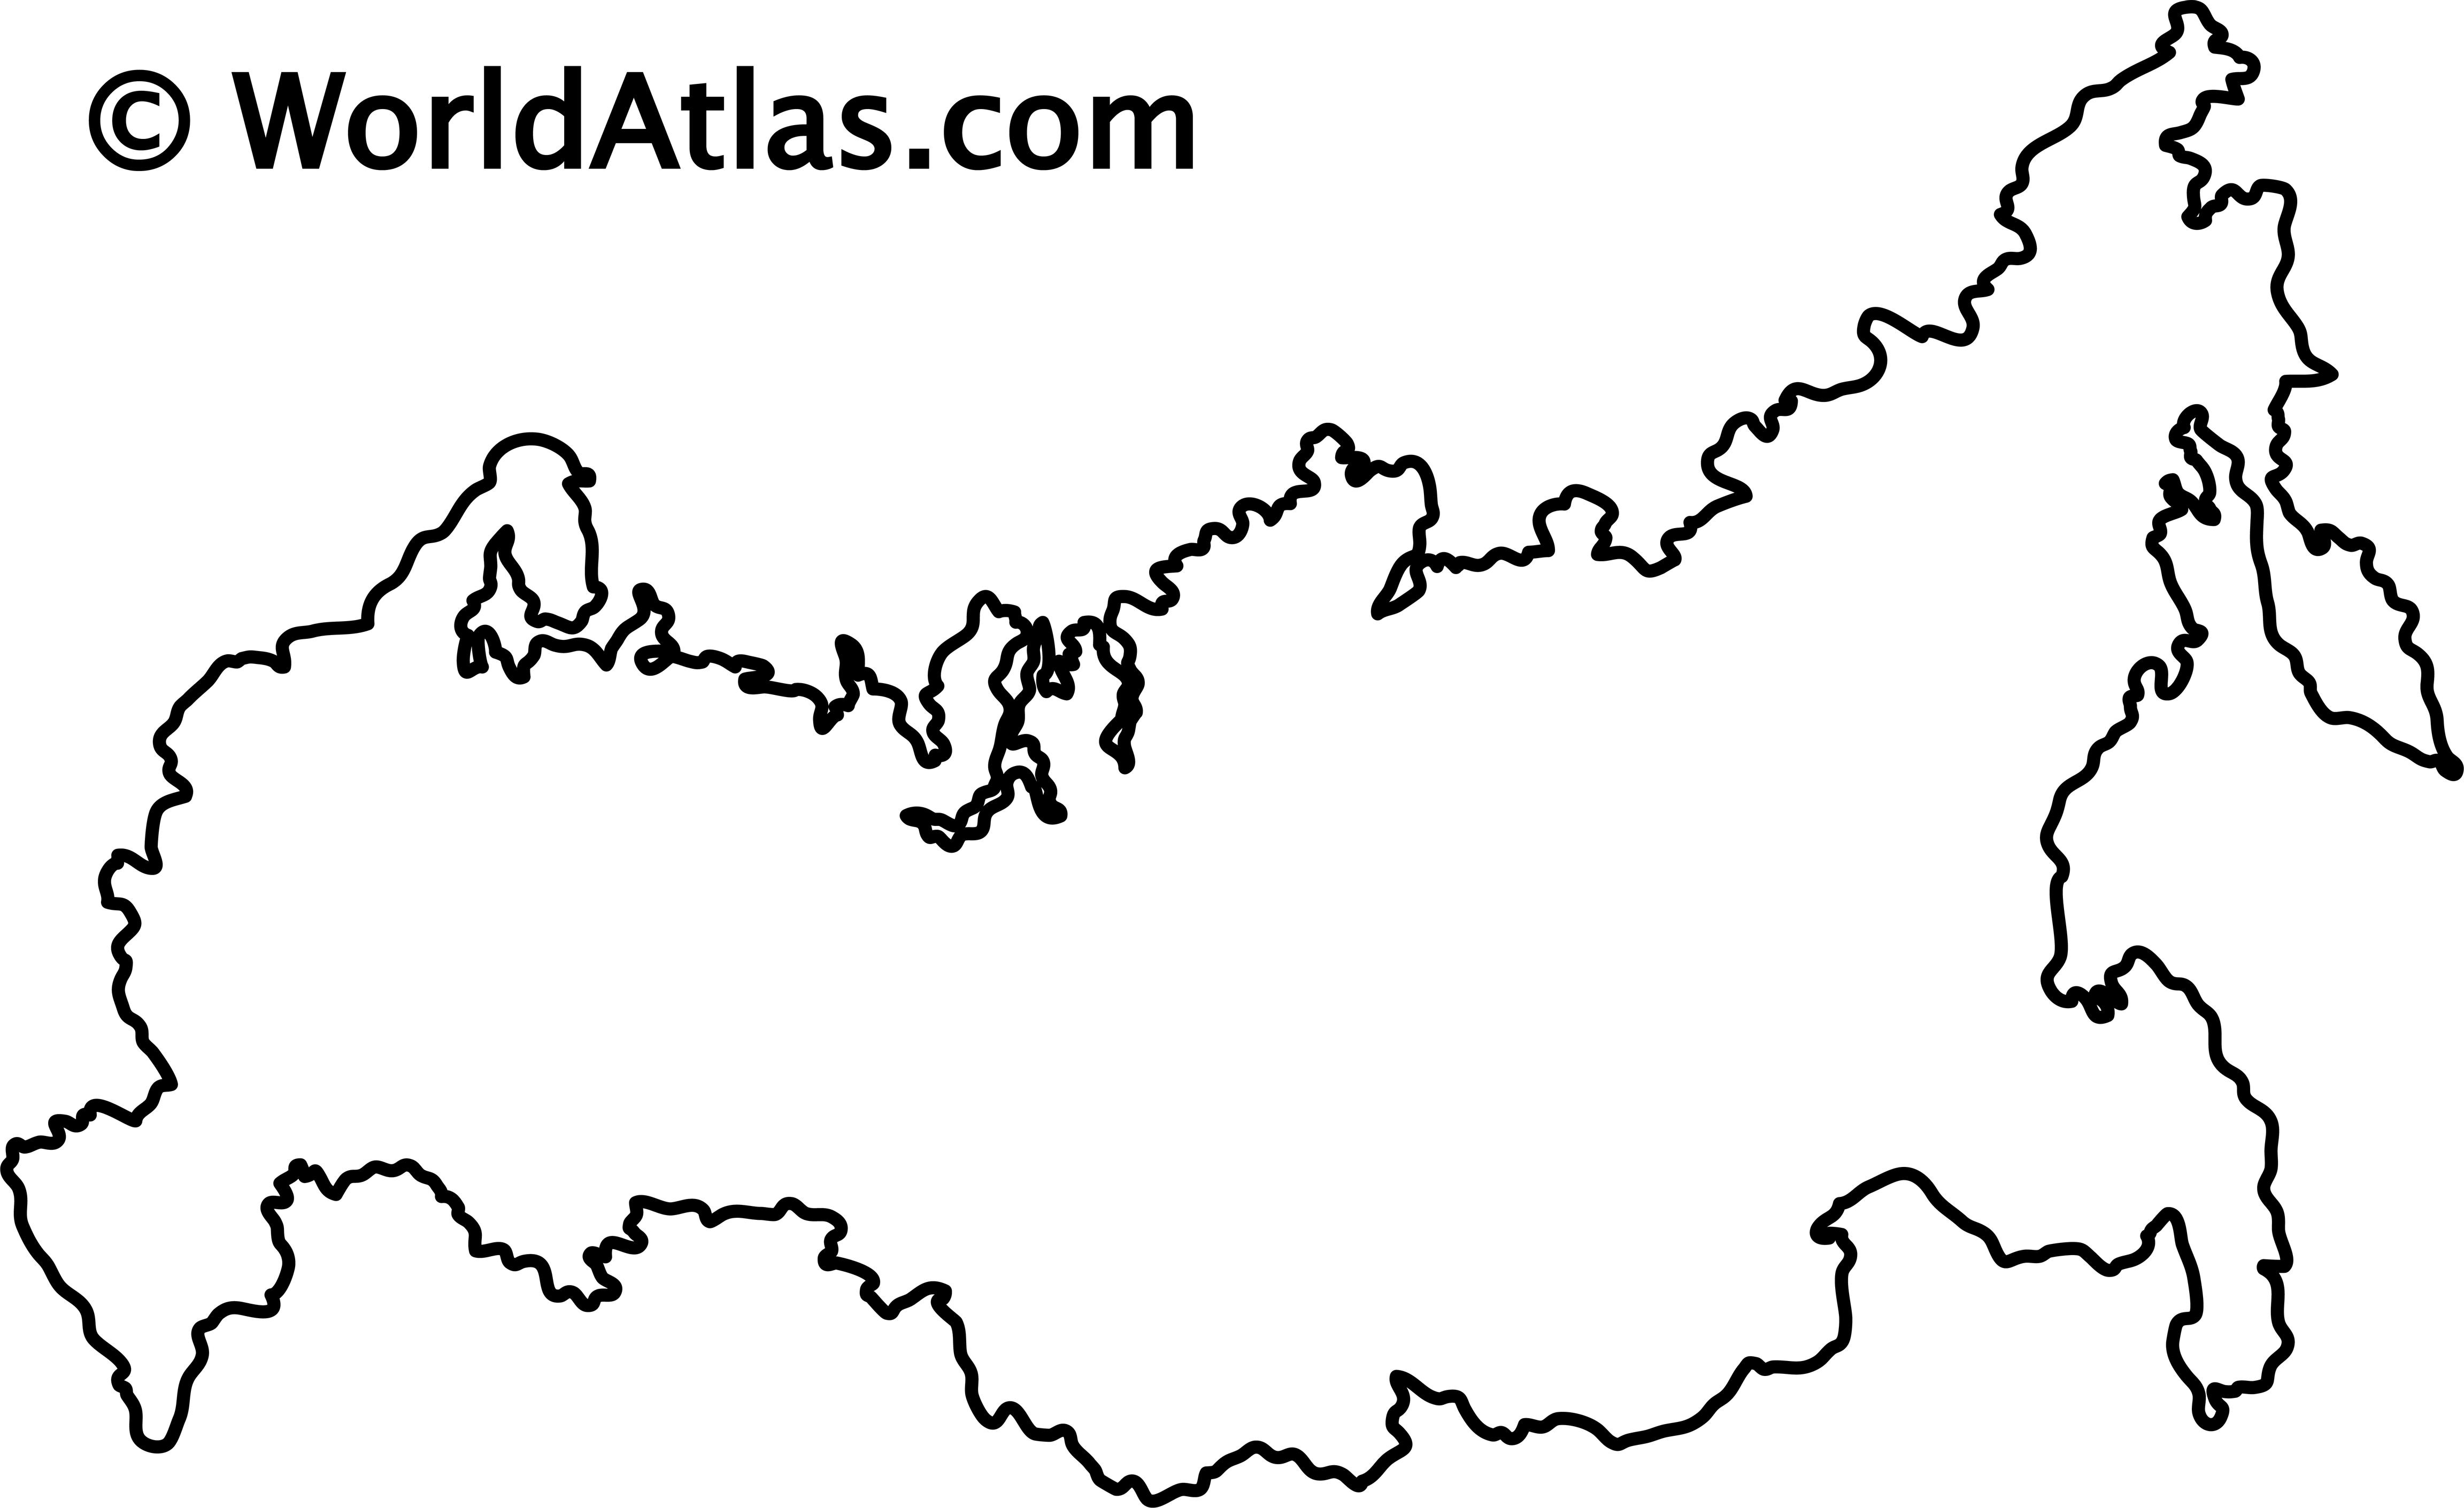 Russia Russian Federation Outline Map